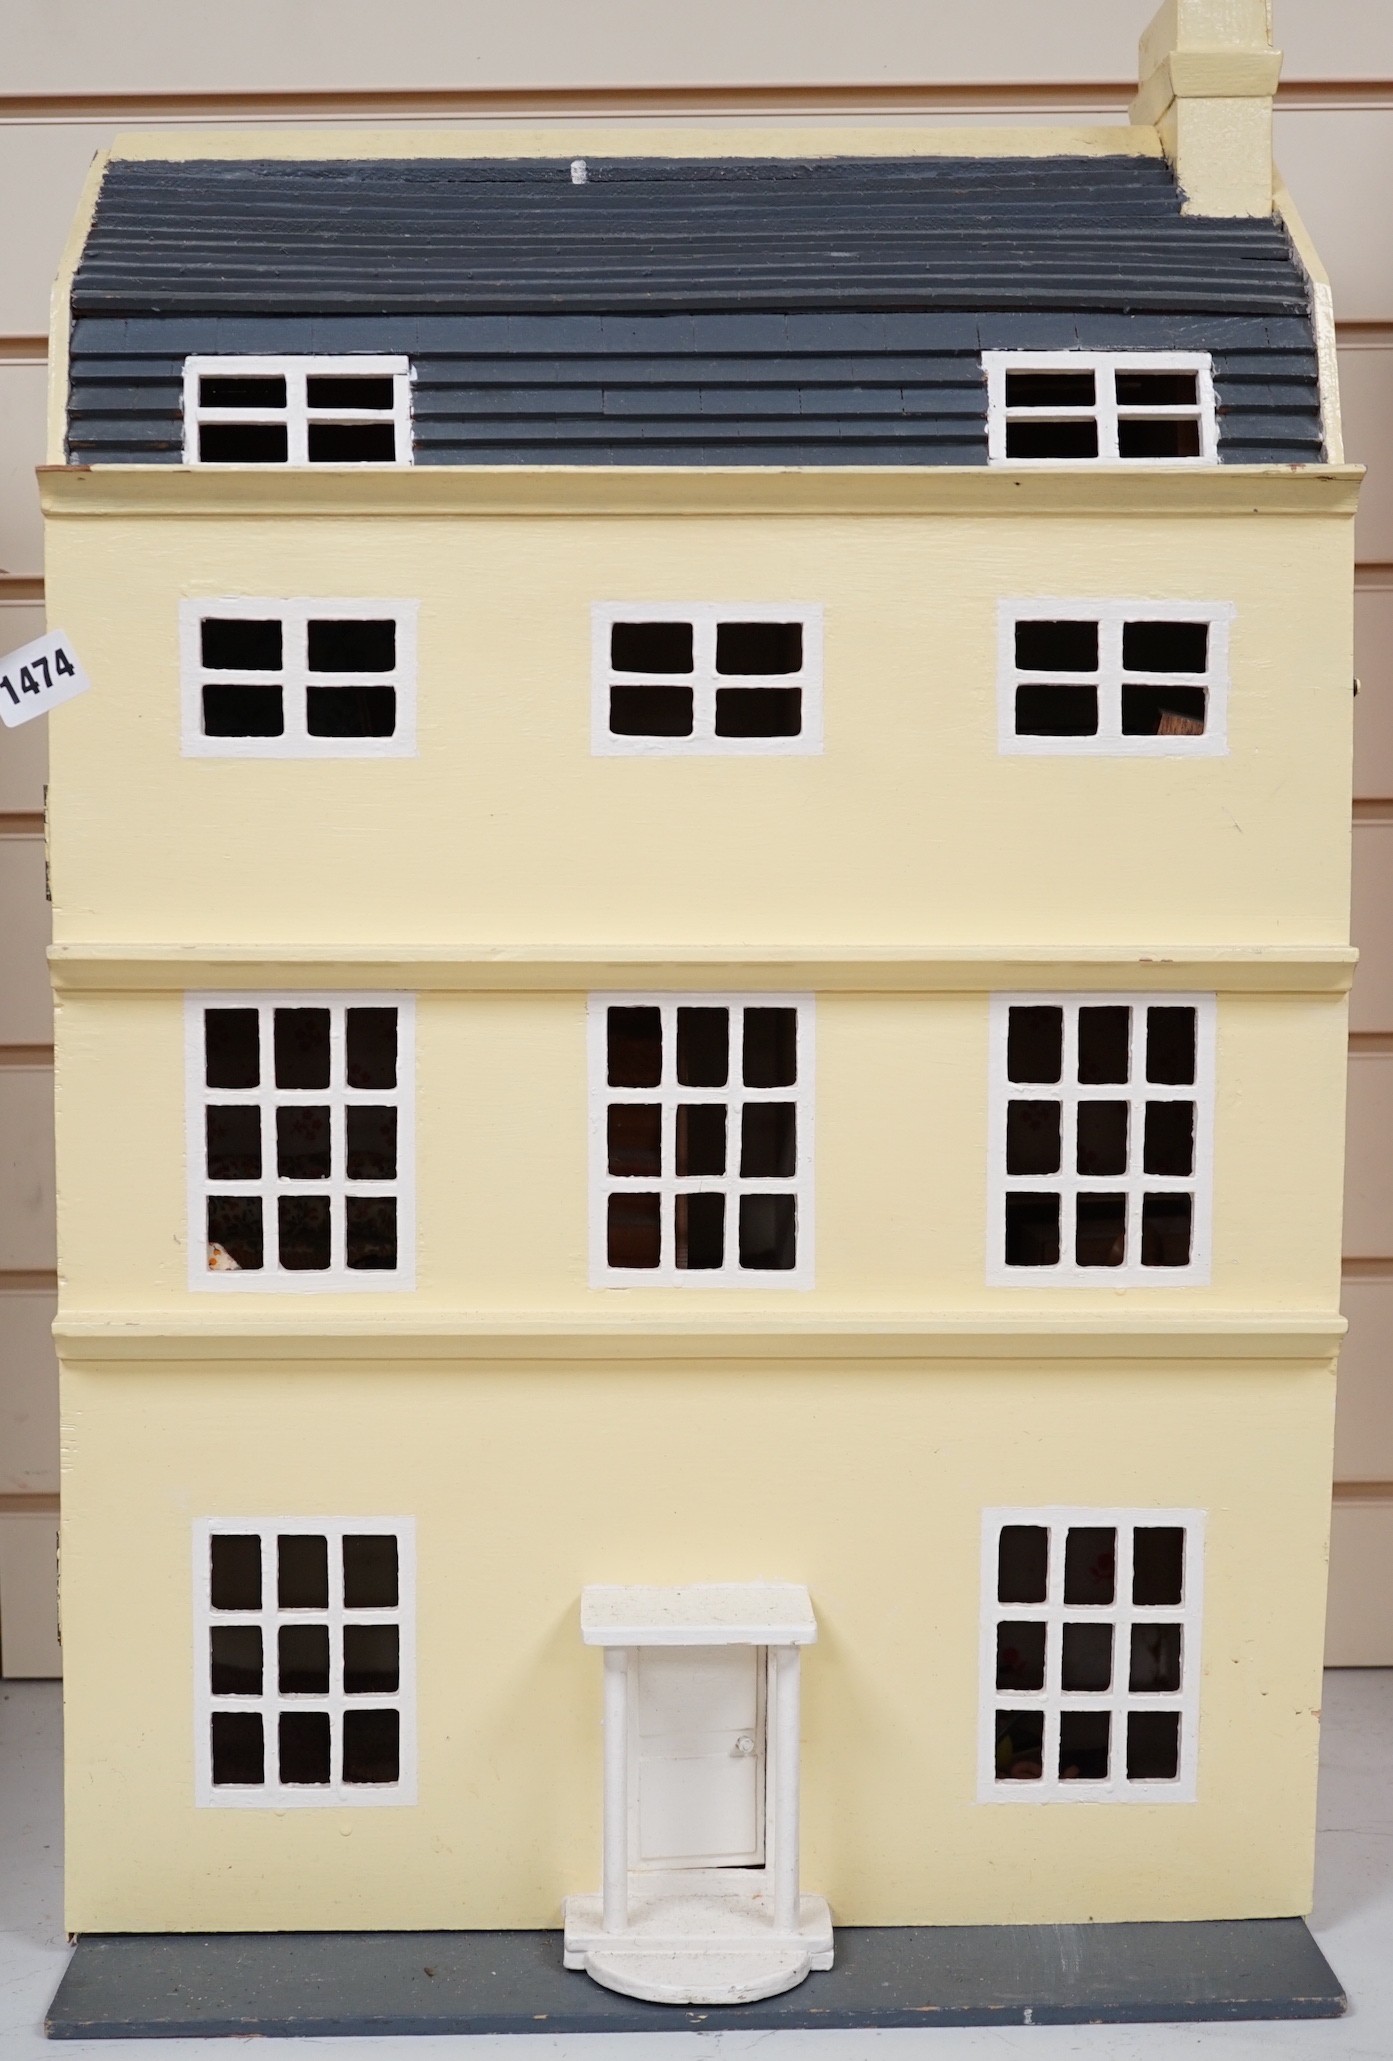 Doll's house based on a Georgian Bath townhouse, with contents,43cms wide x 71cms high